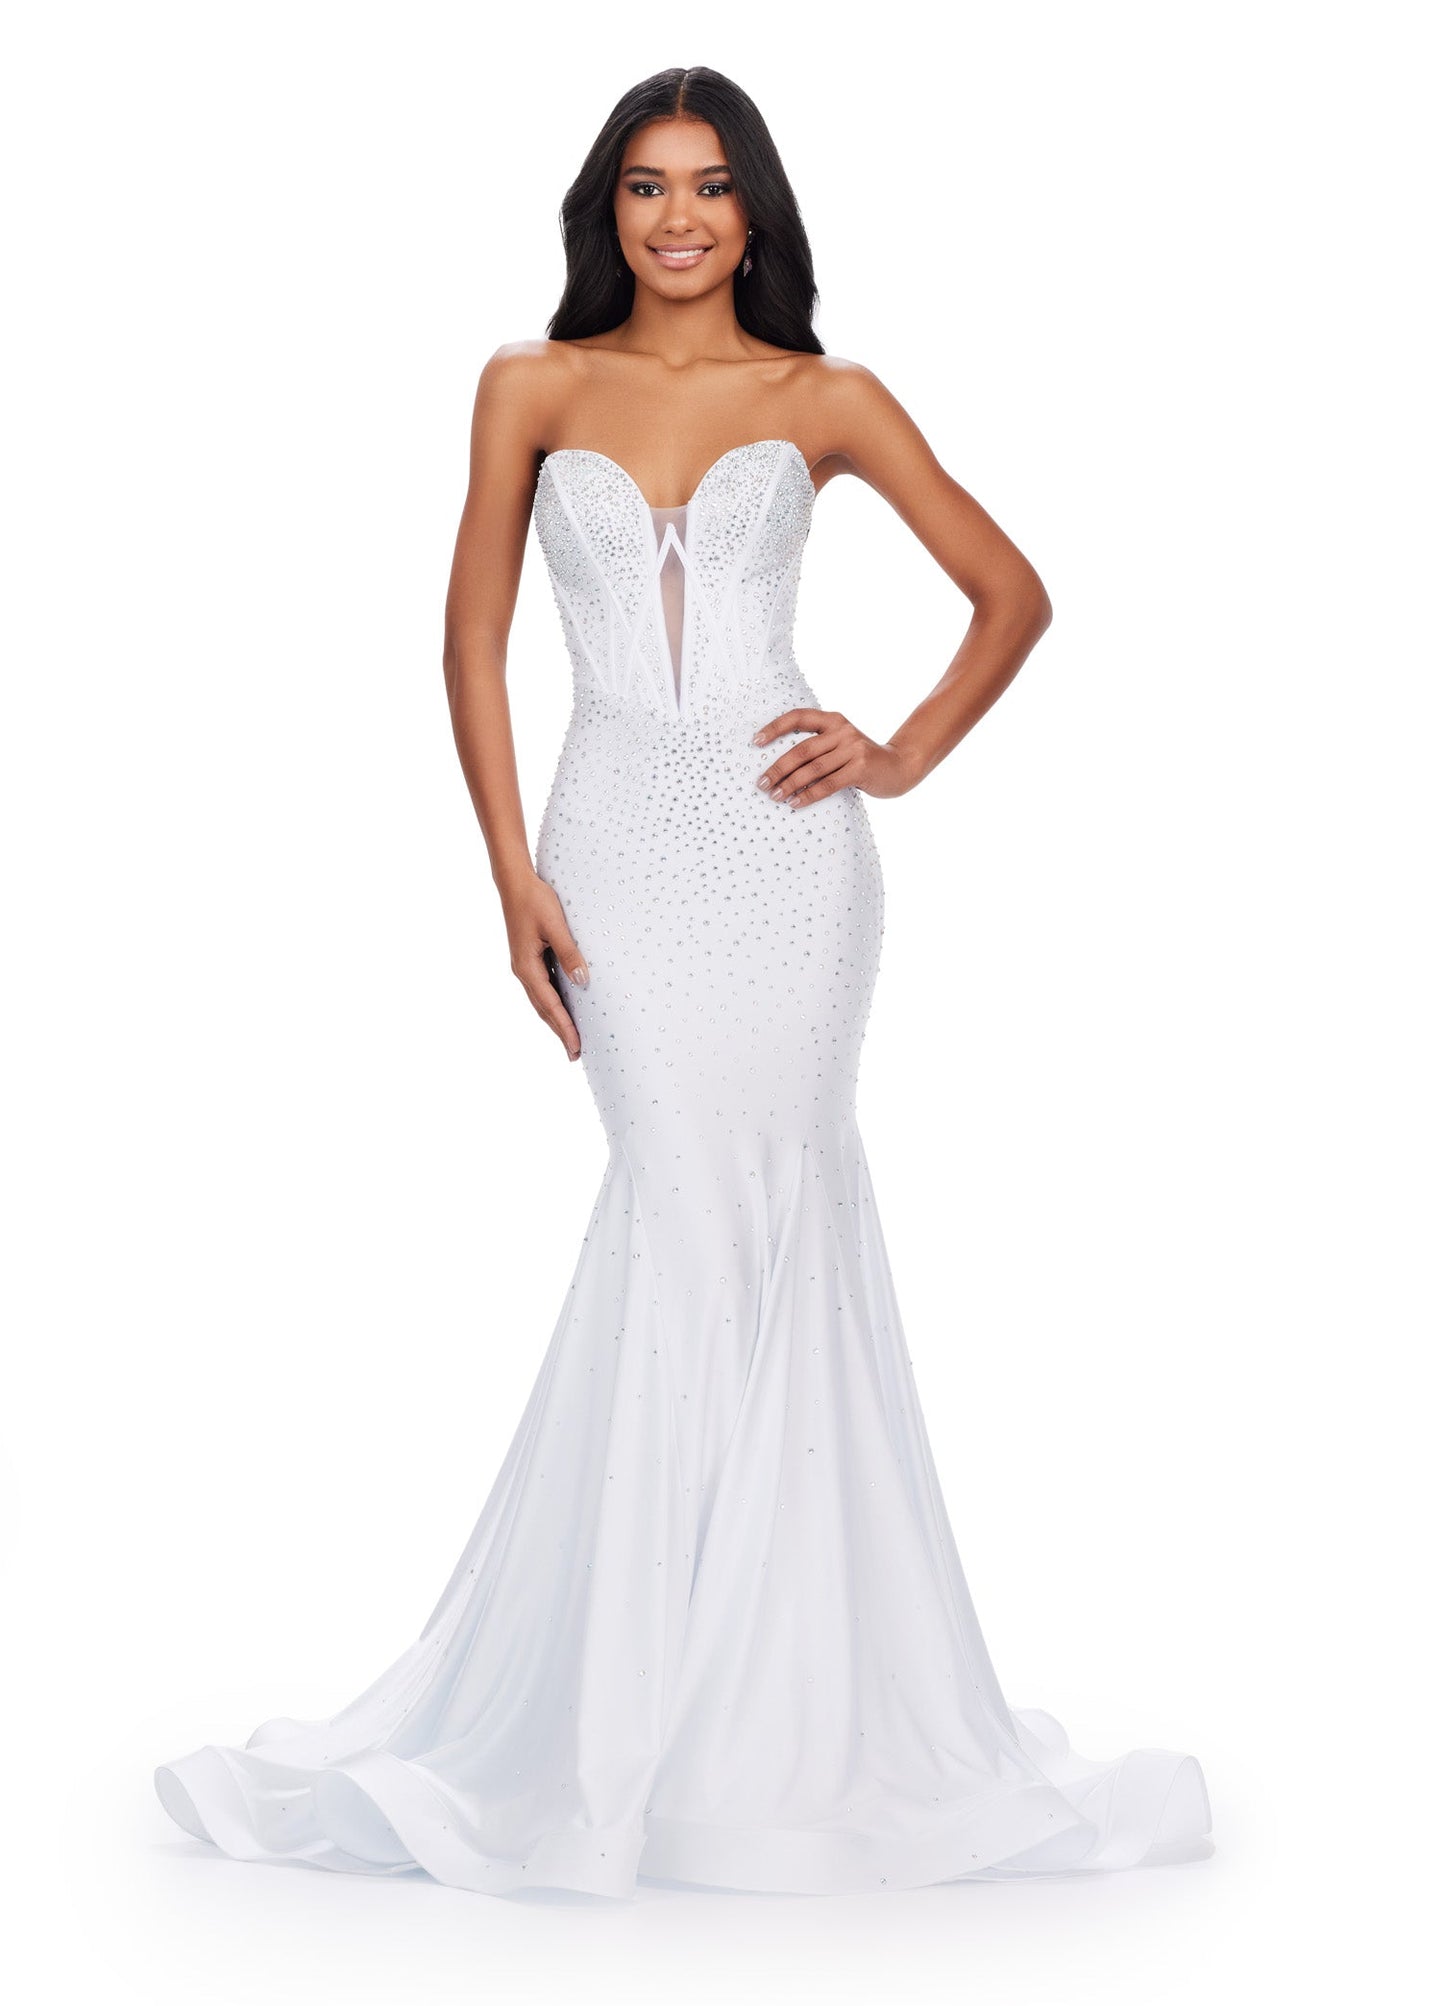 This elegant Ashley Lauren 11560 dress features a strapless neckline, fitted jersey fabric, and a mermaid silhouette that will accentuate your figure. The V-neck adds a touch of sophistication to this formal gown, making it perfect for prom or a pageant. Feel confident and beautiful in this stunning dress. This classic strapless jersey gown features a fully beaded corset bustier. The press on stones make this extra glamourous.